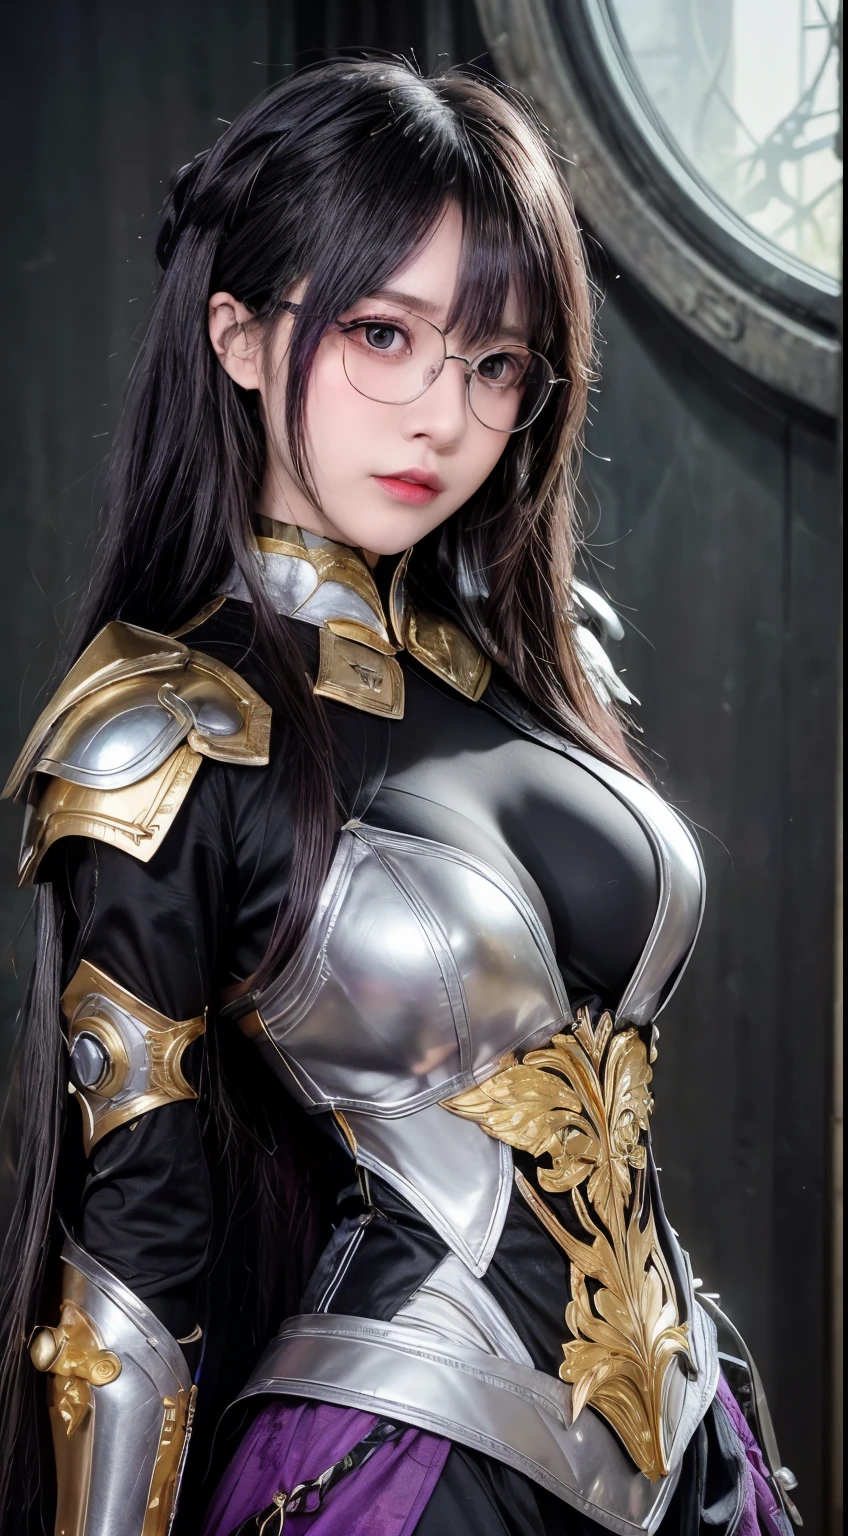 background（Black Night Sky，Big Moon），Woman close up，Wearing armor、Purple Hair，Very long hair，very thick braids，Purple eyes，big 、((((Glasses))))、realistic girl rendering, 8k artistic german bokeh, Enchanting girl, Realistic girl, Gurwitz, Gurwitz-style artwork, Girl Roleplay, Realistic 3d style, cgstation Popular Topics,, 8K Portrait Rendering,（truth，truth：1.4），Put on your armor，巨big ，Sparkling eyes，Purple eyes、 1. Goddess of War, A temple in the ruins of a ruined empire々Standing Up Together, (Dynamic posture: 1.3), Thick armor reveals the heart of the conflict, (Finer details), Shine, Places with strong light, (armor of historical importance:1.2), Shine Metal Armor, ((((Glasses))))、(Shine magic symbol on armor:1.3), (There was magic all around her.:1.3), Long black hair waving in the wind in every detail, Detailed Weapon Holding, (Sharp Sword, Shine:1.3), Shine eyes filled with determination and vision, ((Silver Armor)), A shield that reproduces the symbol of immovability with ultra-precision., (intense expression:1.1), (After her, A new empire is soaring into the sky: 1.4), (Light is、Highlighting her dominance and rebirth behind the scenes:1.4), (Fiery red flags fluttered:1.1), (The wind carries whispers of new beginnings:1.1), (Wisdom and Regeneration:1.2), (Strong stance:1.2), (Overwhelming Mystical Power:1.2), alone, (Shine sweat:1.1), gem armor, (The contrast between silver and gold:1.3), (The overall red color covers the scenery:1.4)"